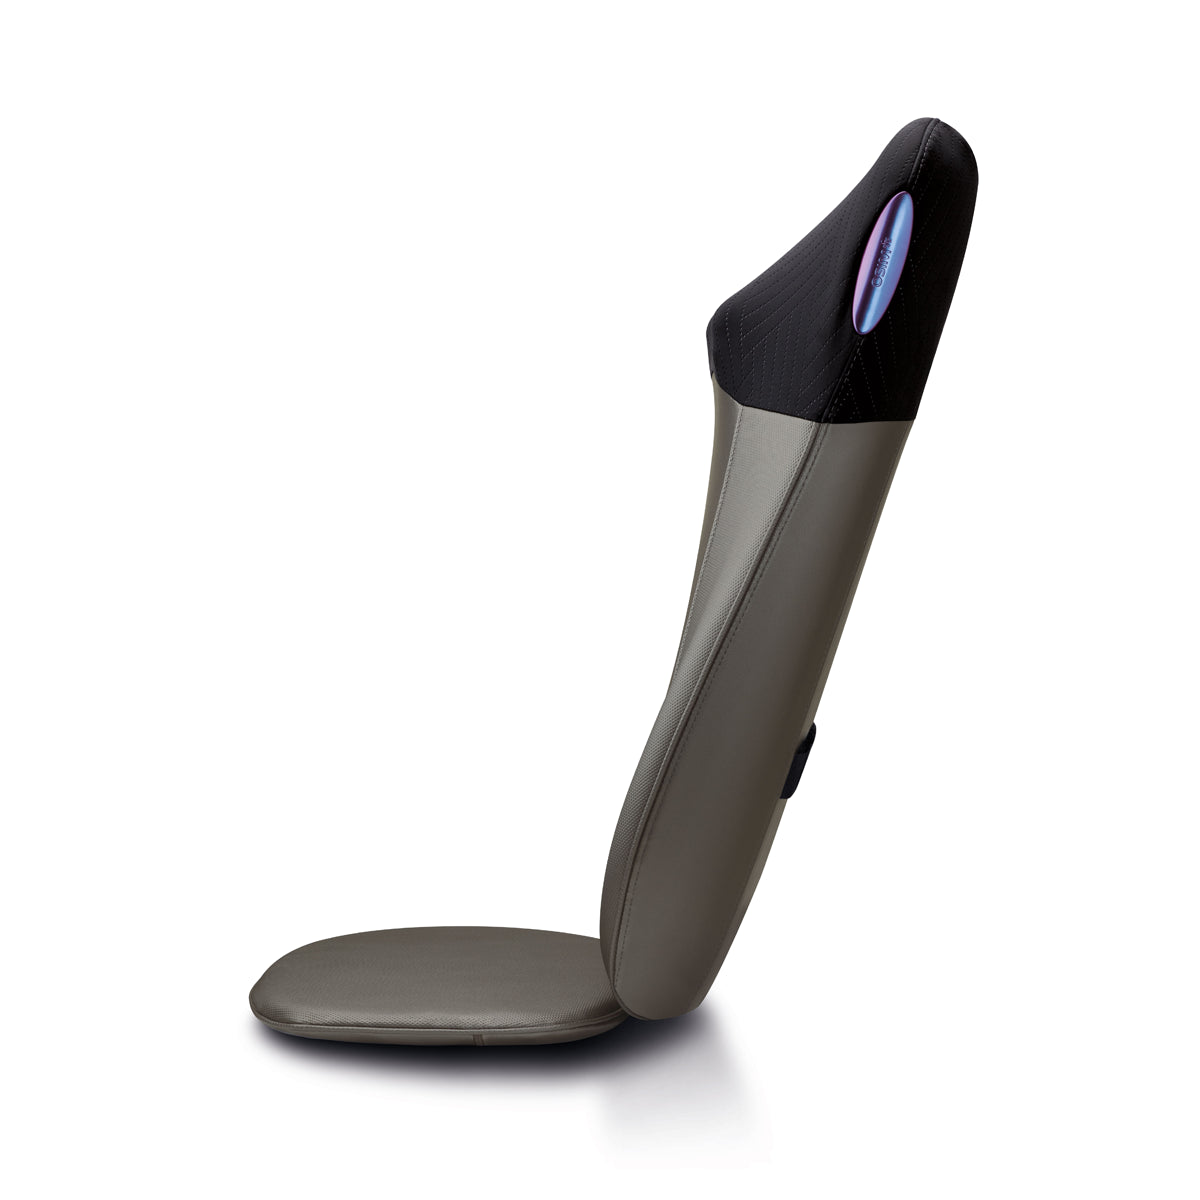 uJolly 2 Smart Back Massager side view image